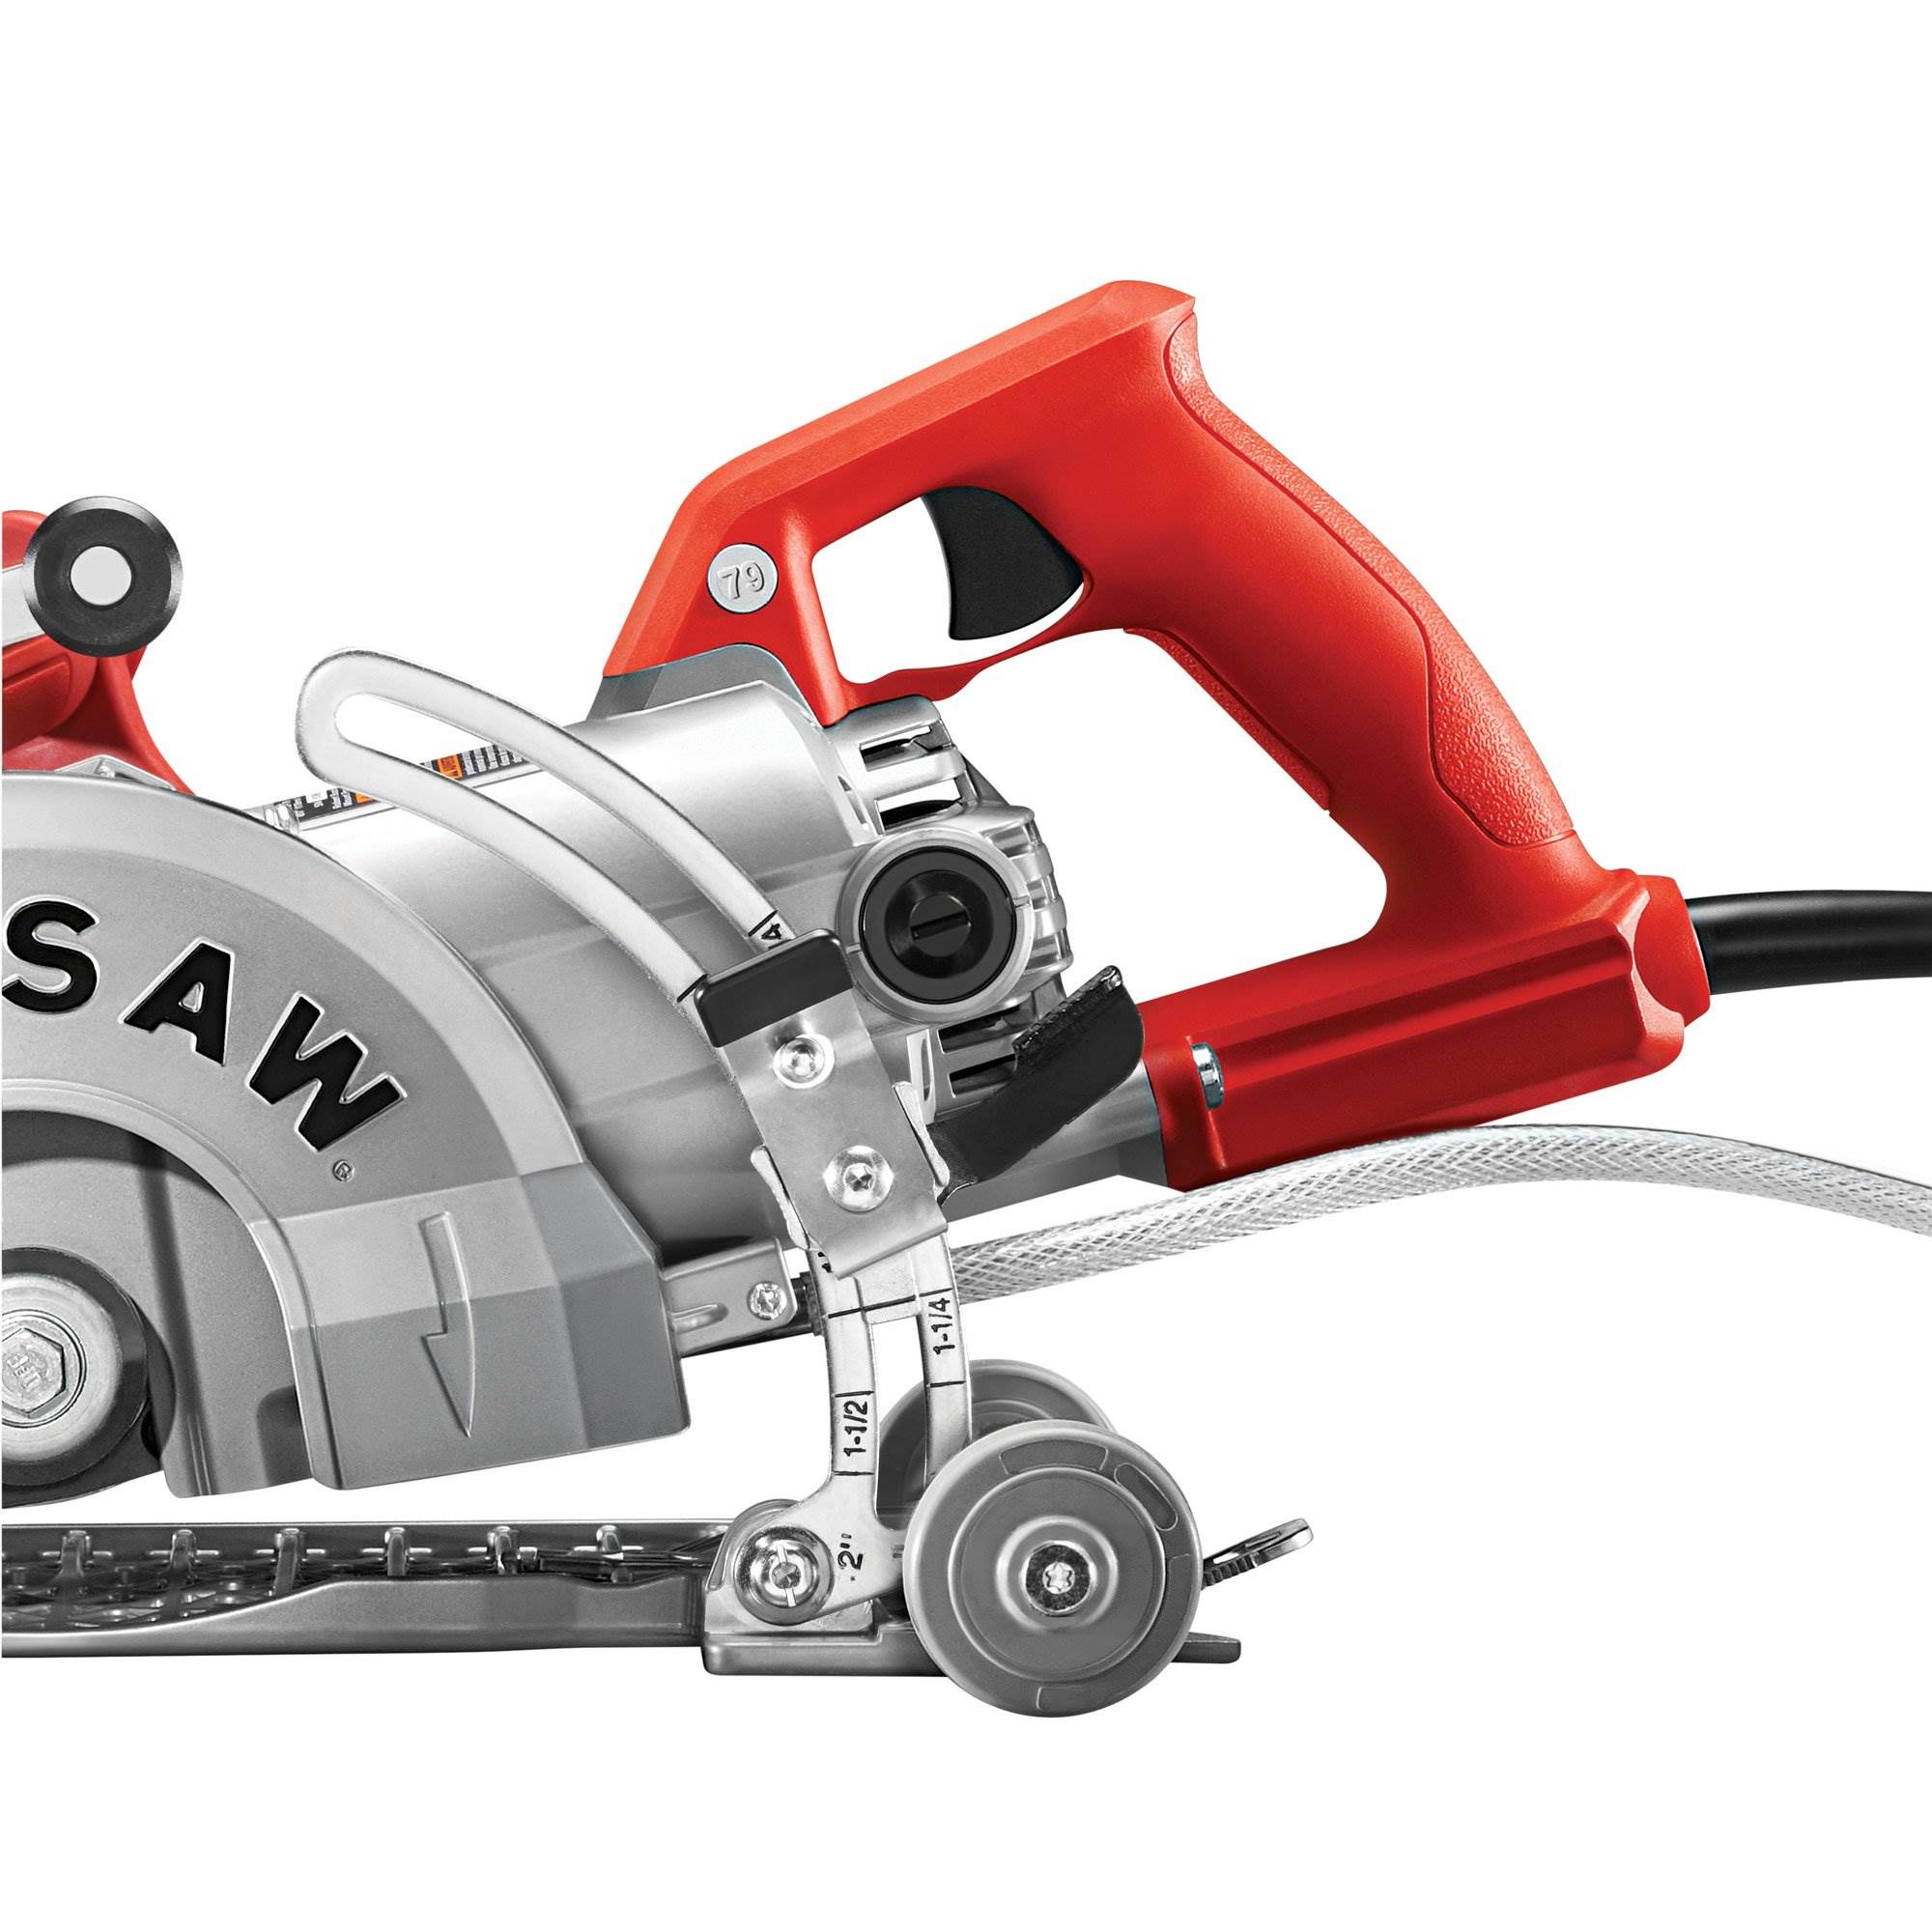 Skilsaw SPT79-00 Medusaw Inch 15 Amp Aluminum Worm Drive Saw for Concrete 